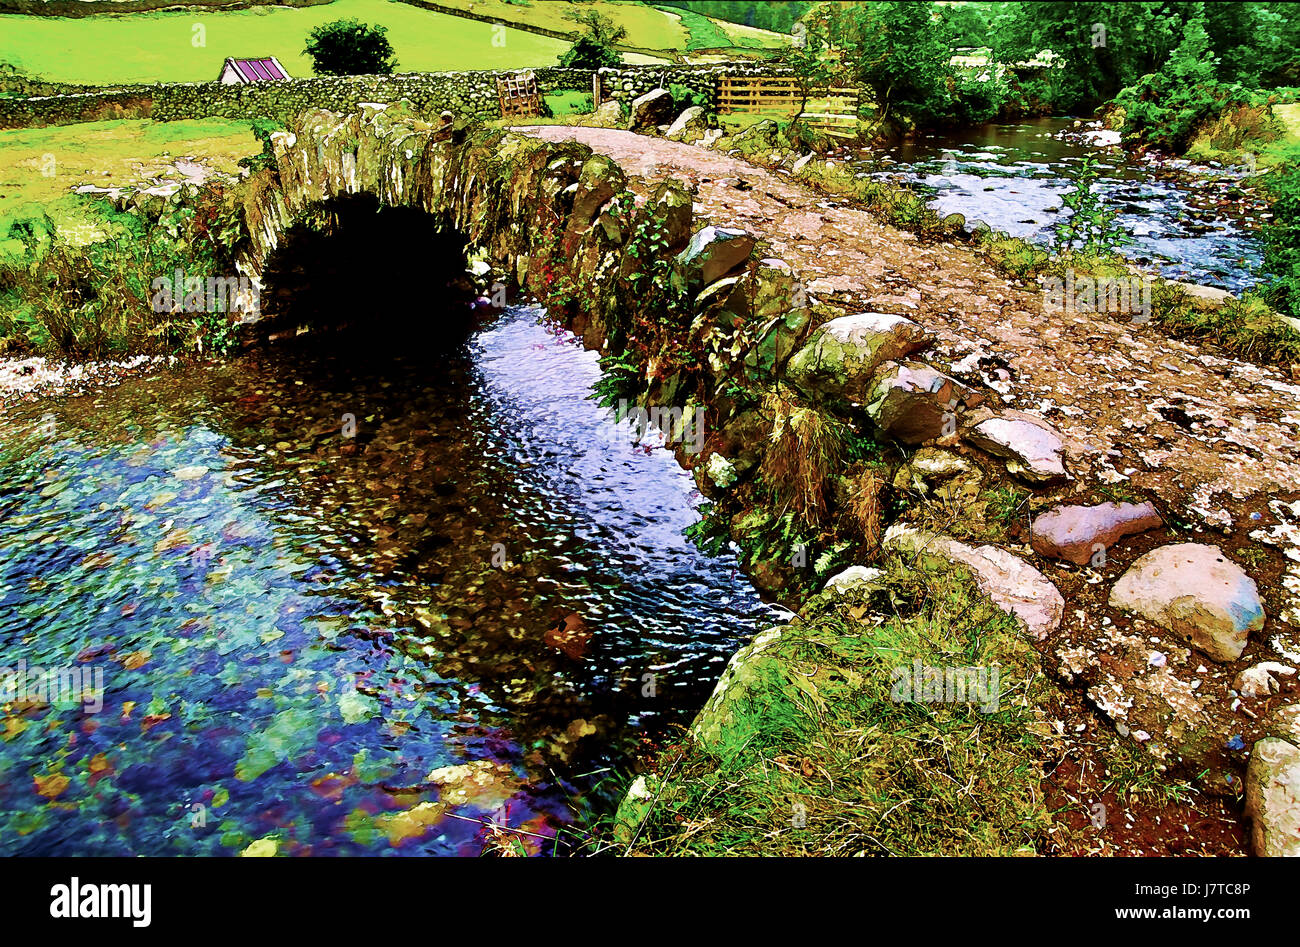 Pictorial Art-Image The English Lake District Stock Photo